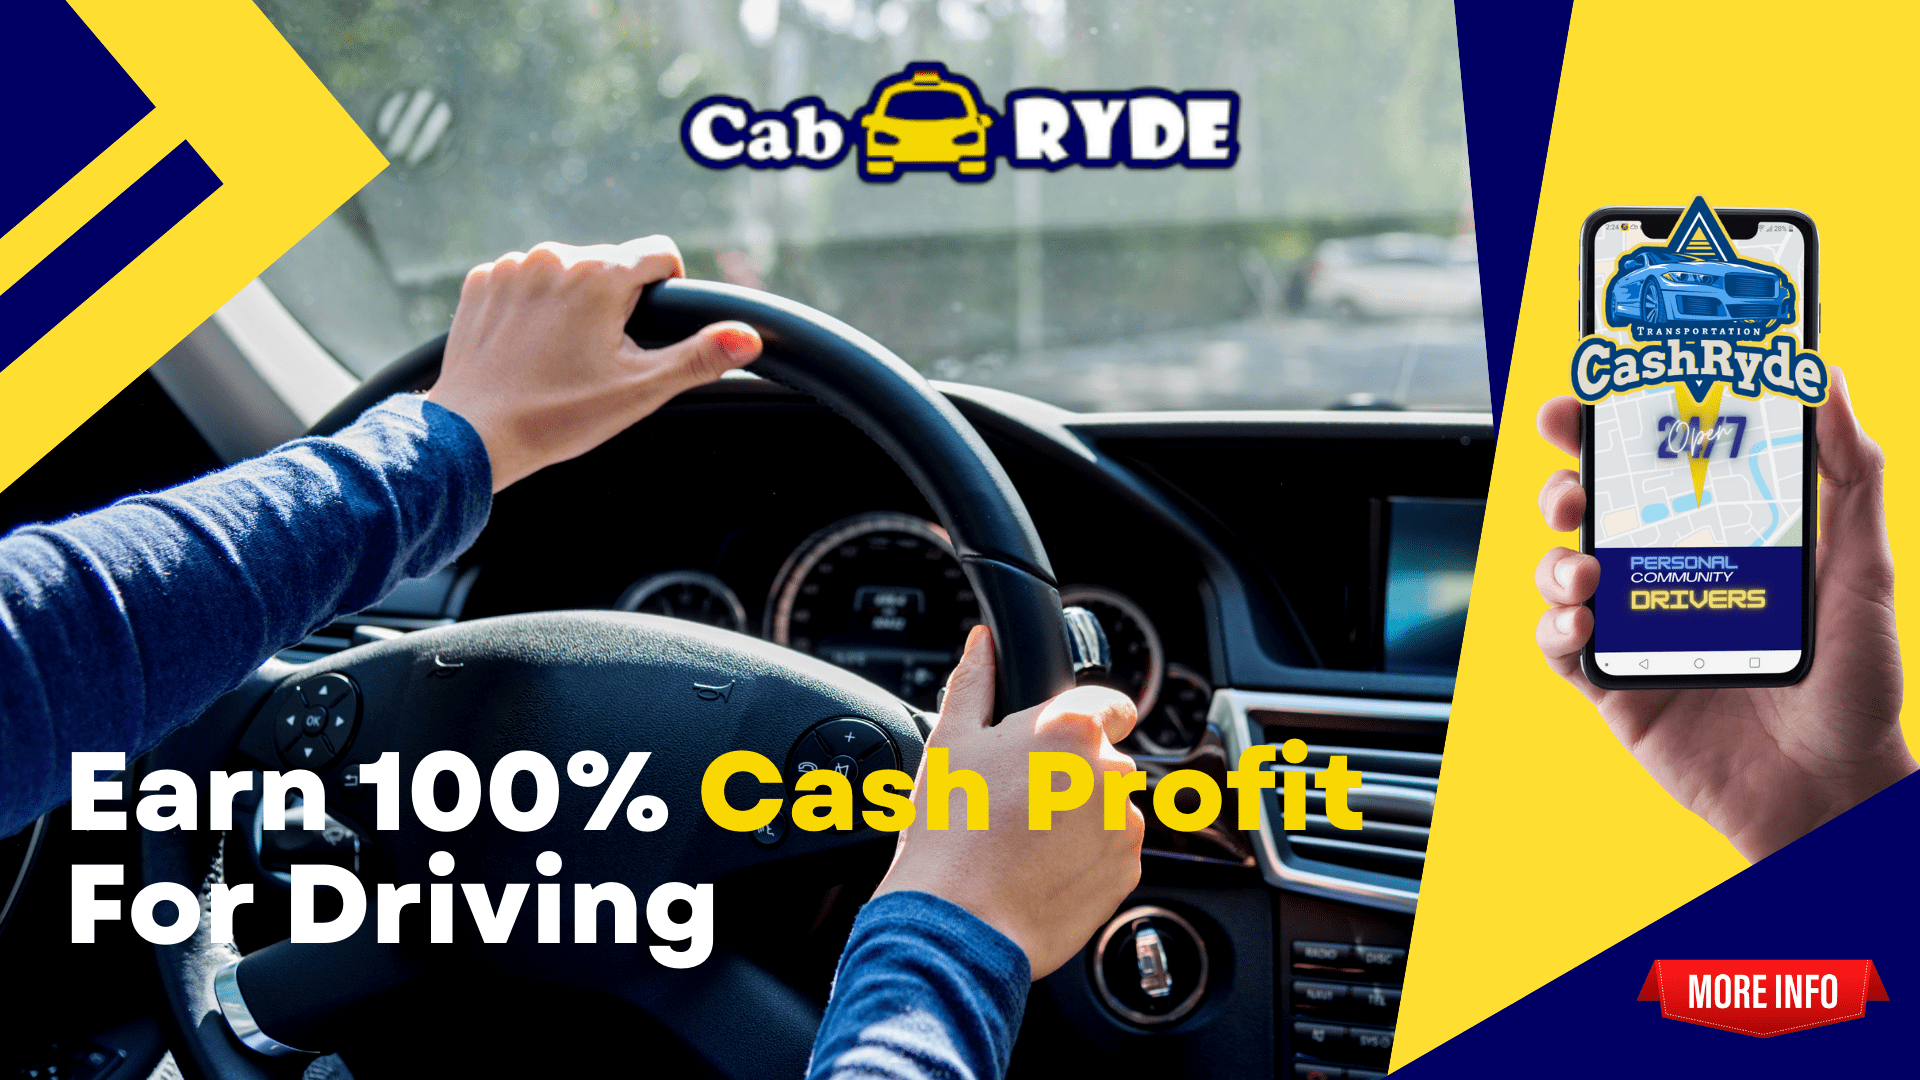 Ride with the CashRyde App